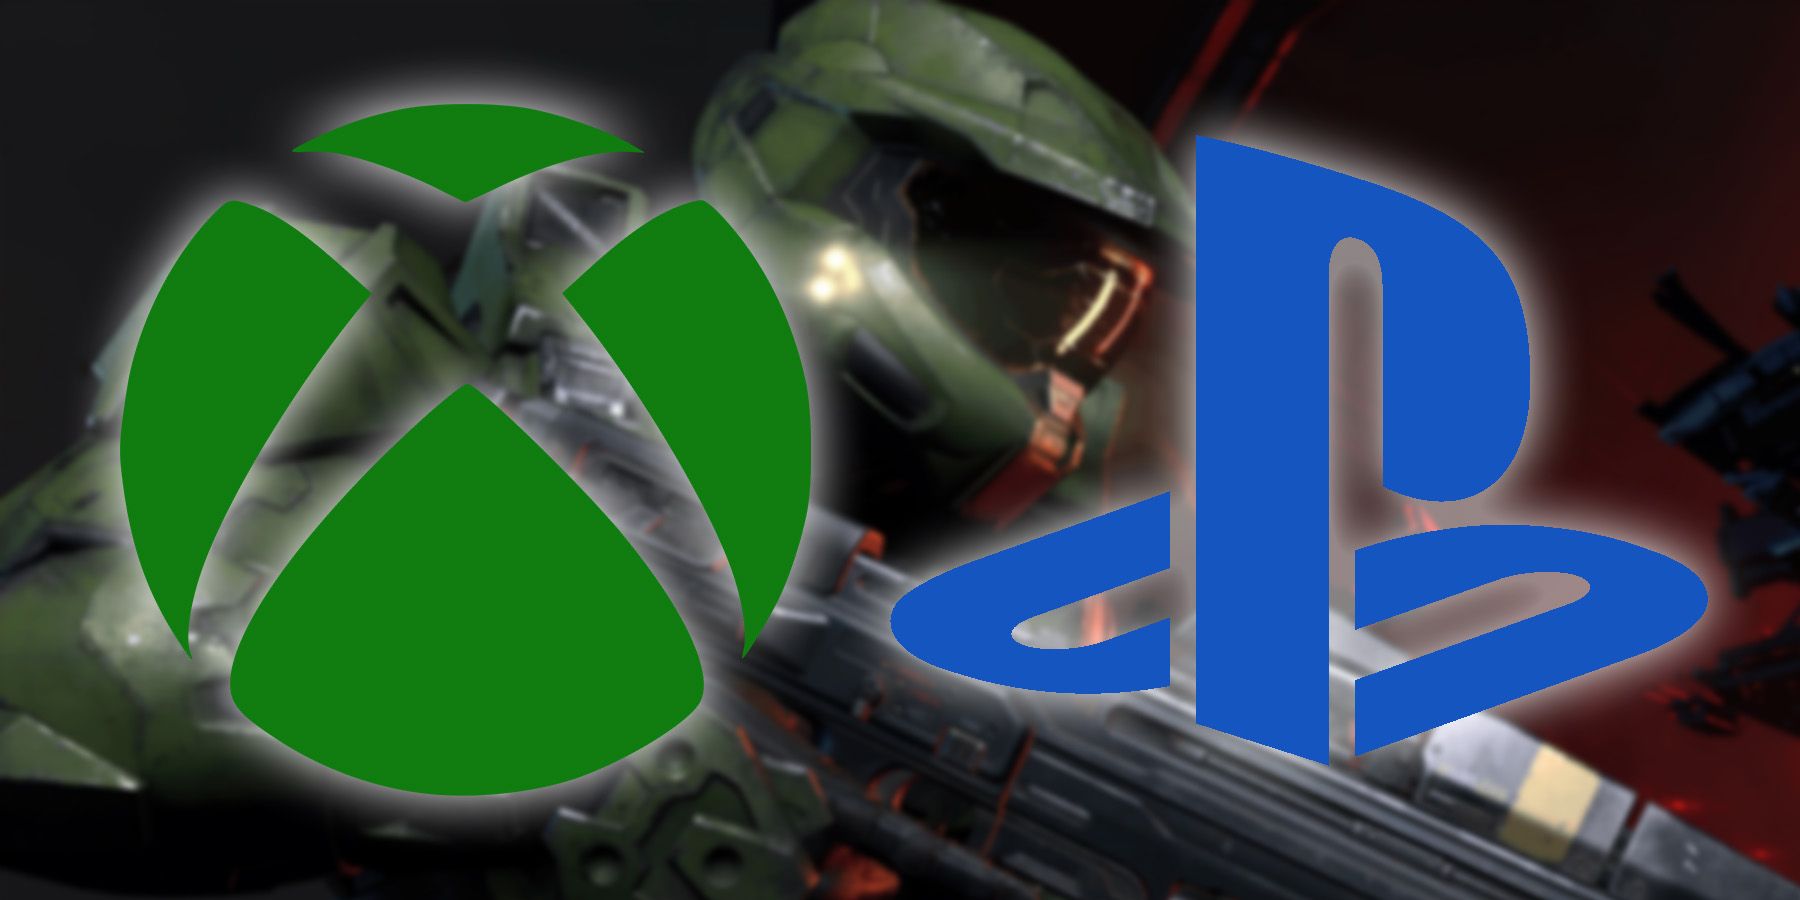 Xbox and PlayStation logos on front of an image of Master Chief with an assault rifle.